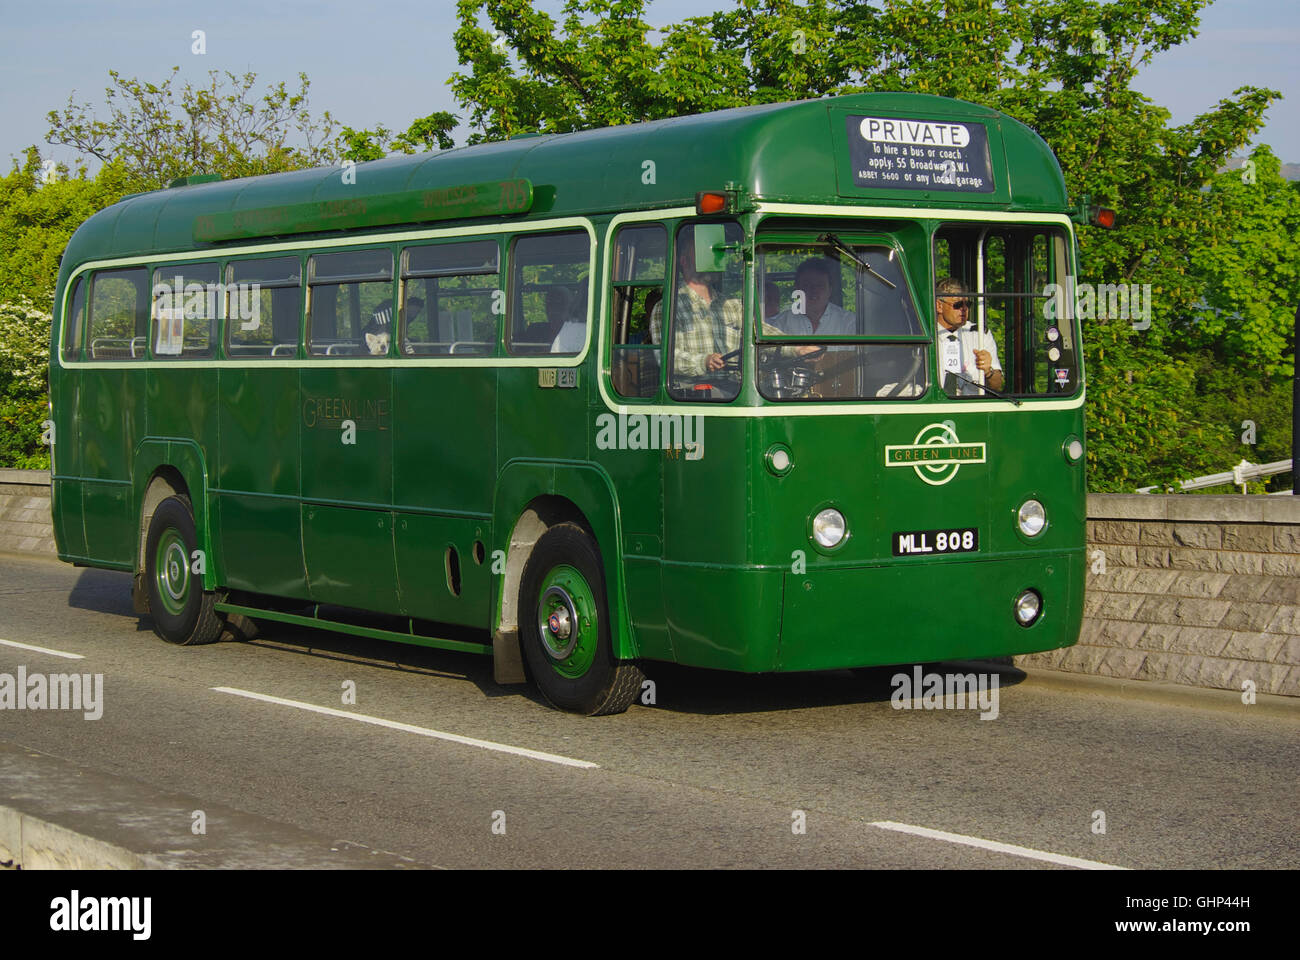 Vintage Green Line bus ML 808, a Conwy Foto Stock